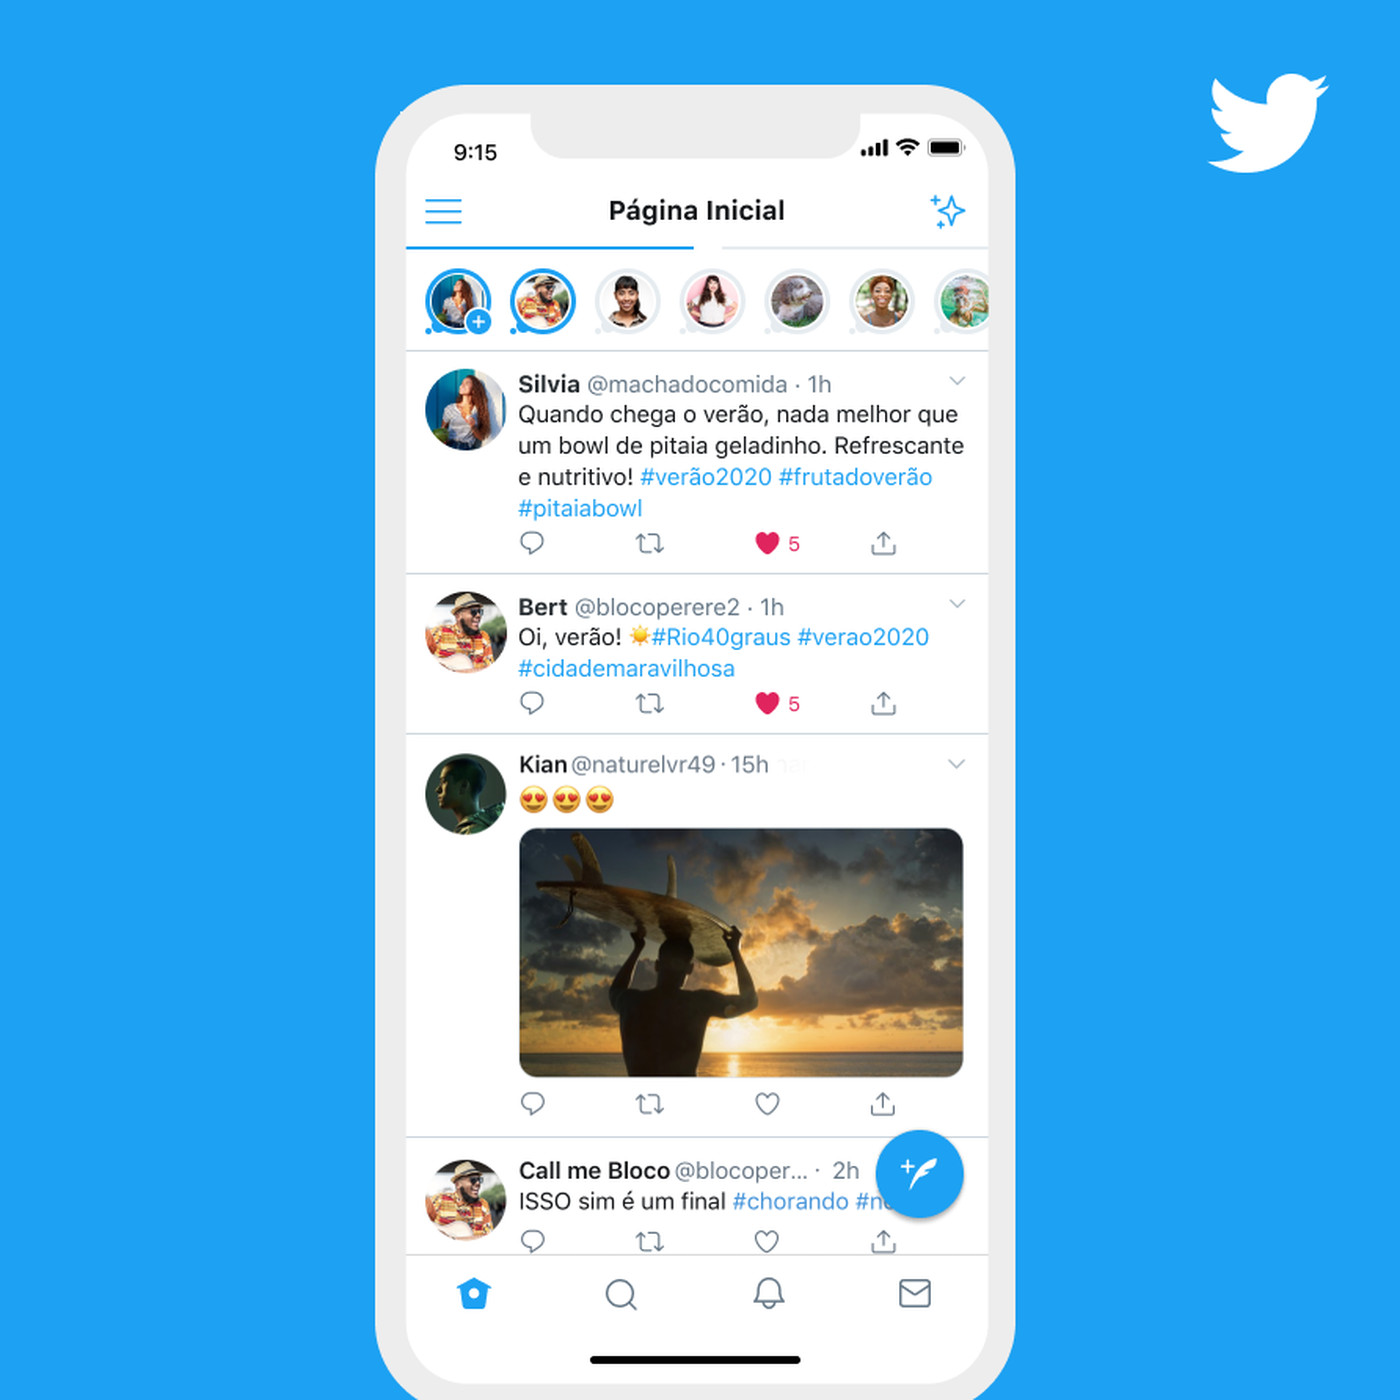 Twitter tests a cleaner interface